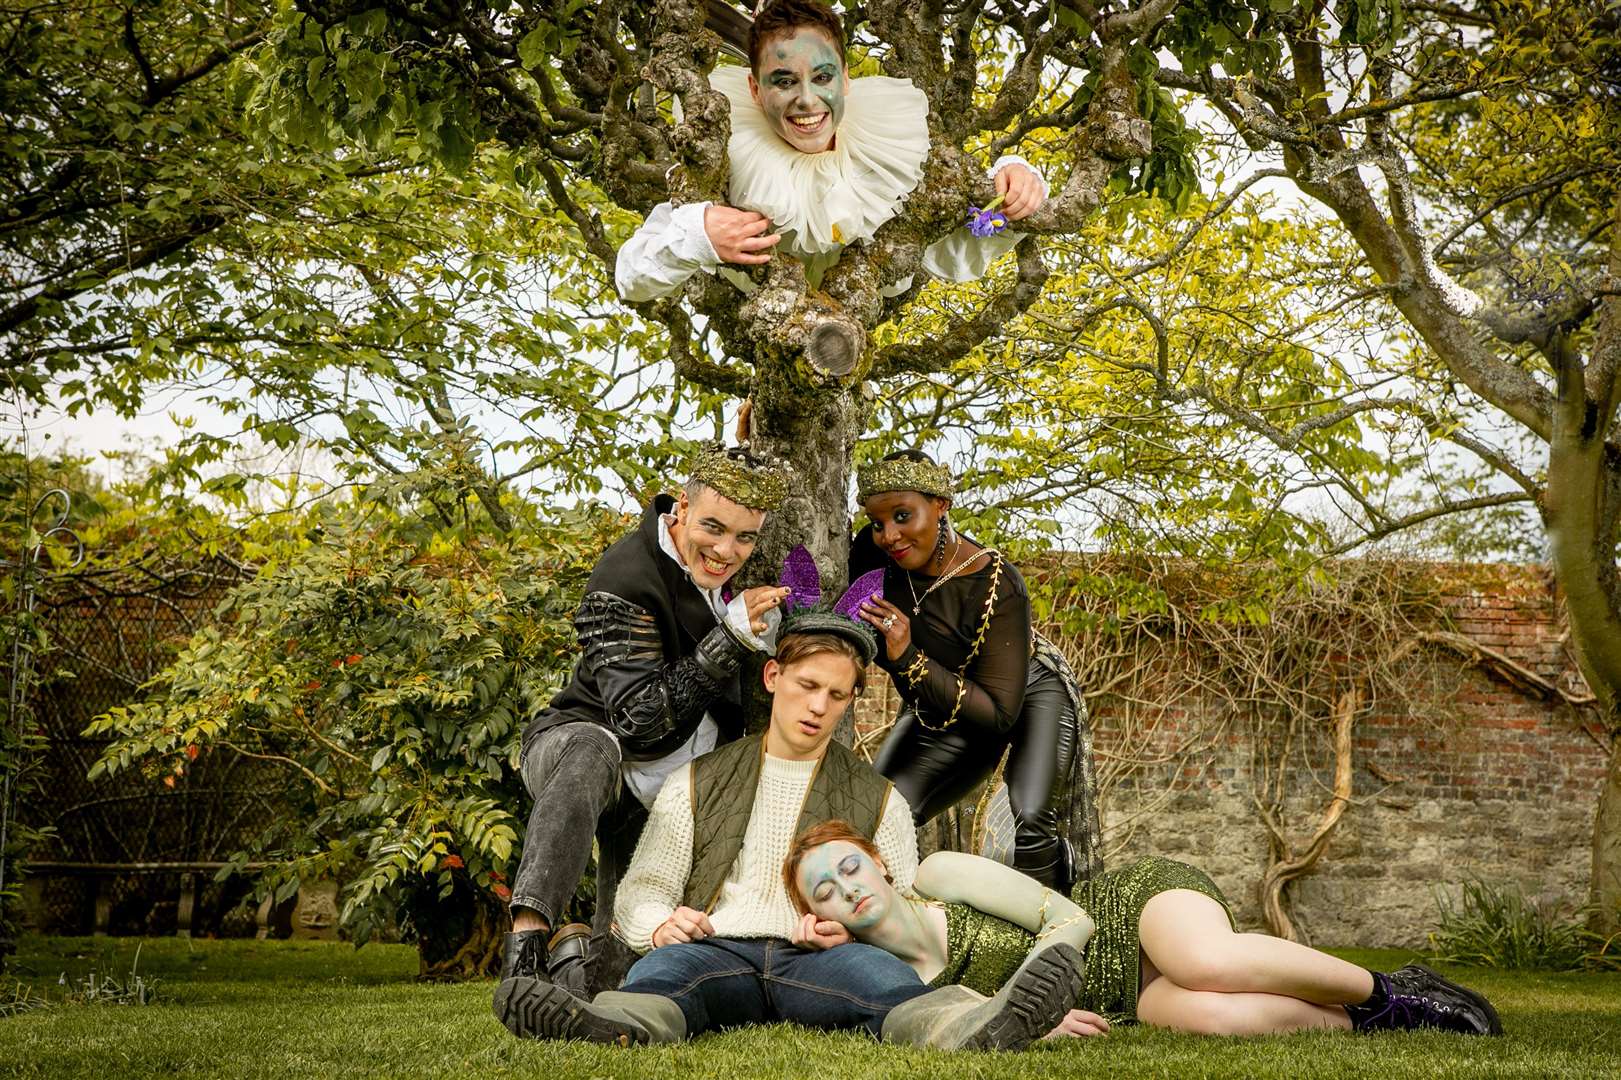 The Changeling Theatre presents A Midsummer Night's Dream this year